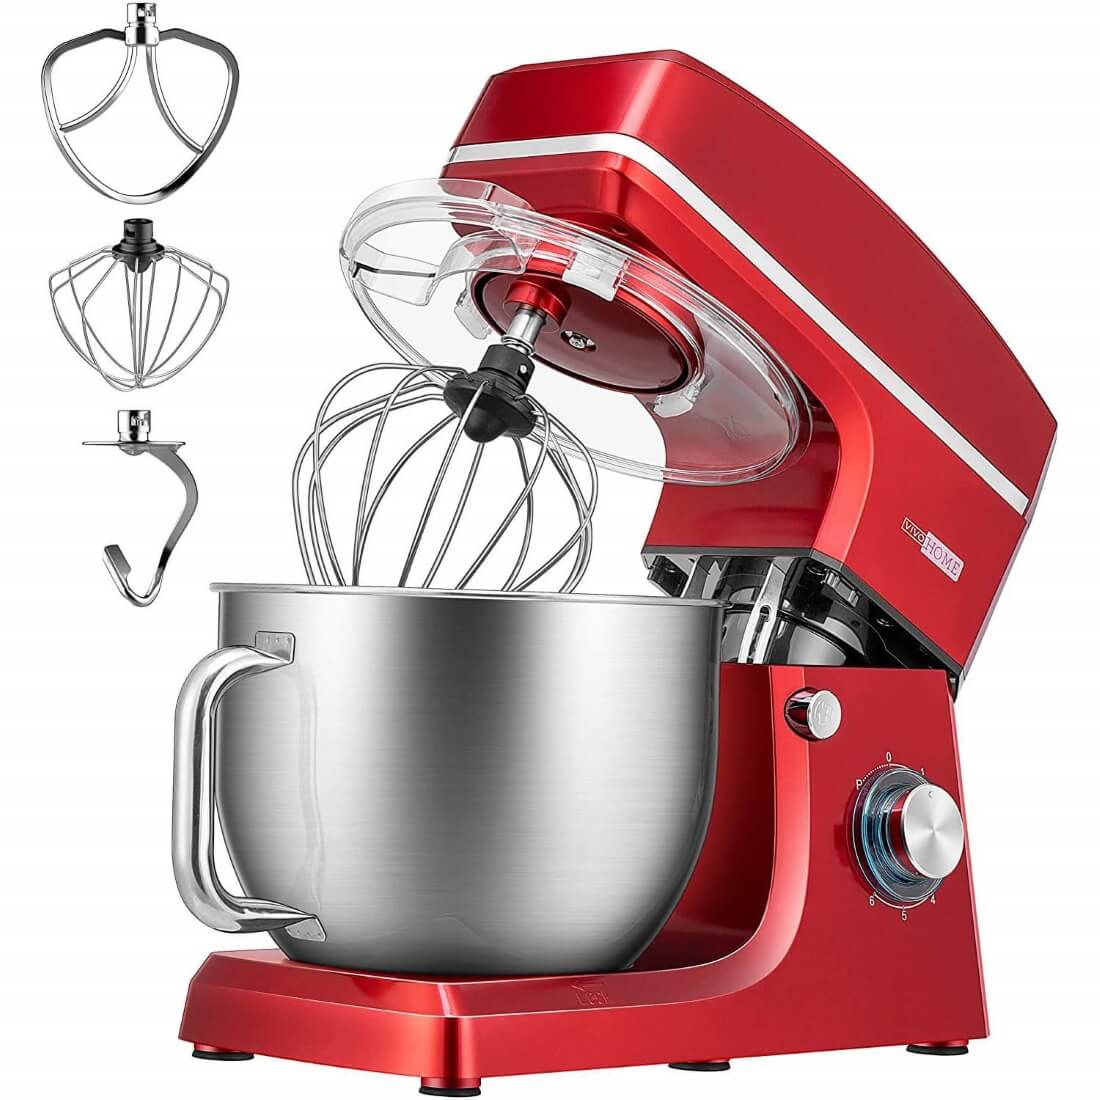 Aucma Stand Mixer,6.5-QT 660W 6-Speed Tilt-Head Food Mixer, Kitchen  Electric Mixer with Dough Hook, Wire Whip & Beater 2 Layer Red Painting  (6.5QT